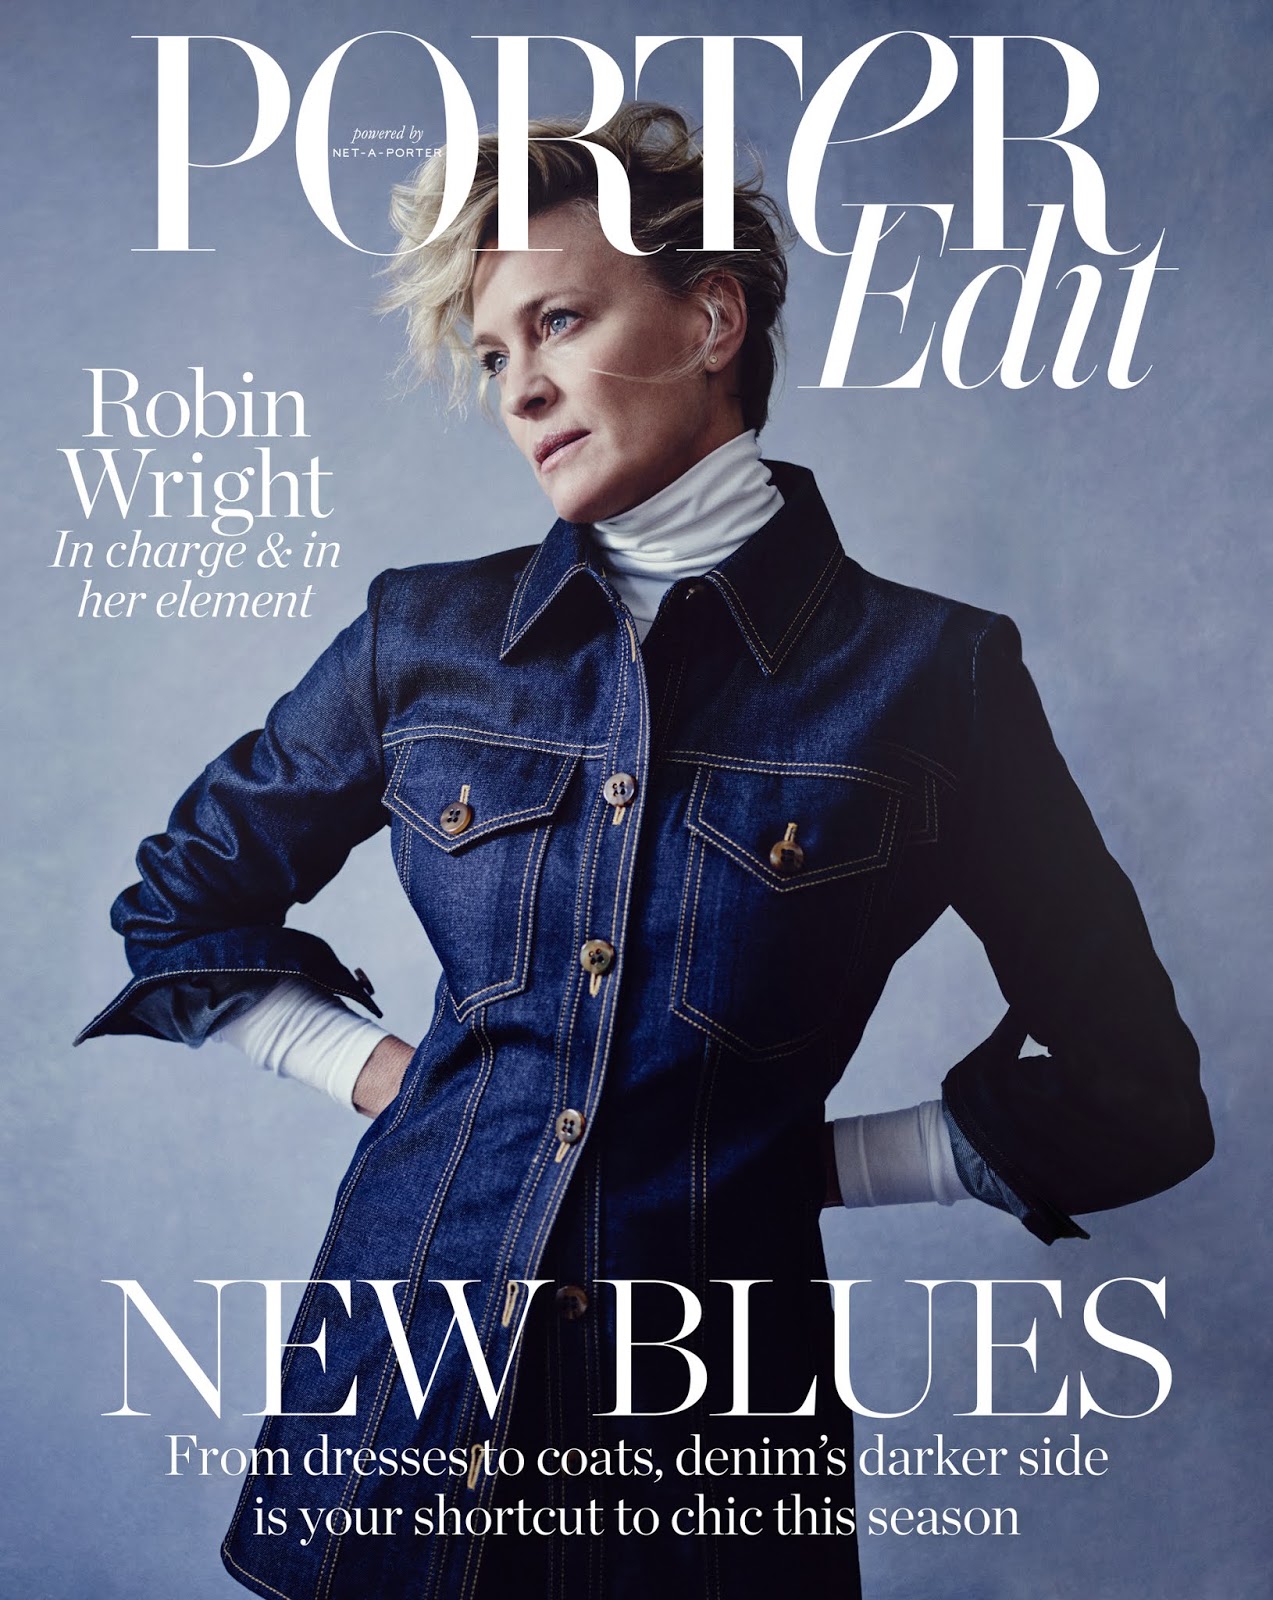 Robin Wright by Boo George for Porter Edit Aug 3, 2018 (1).jpg